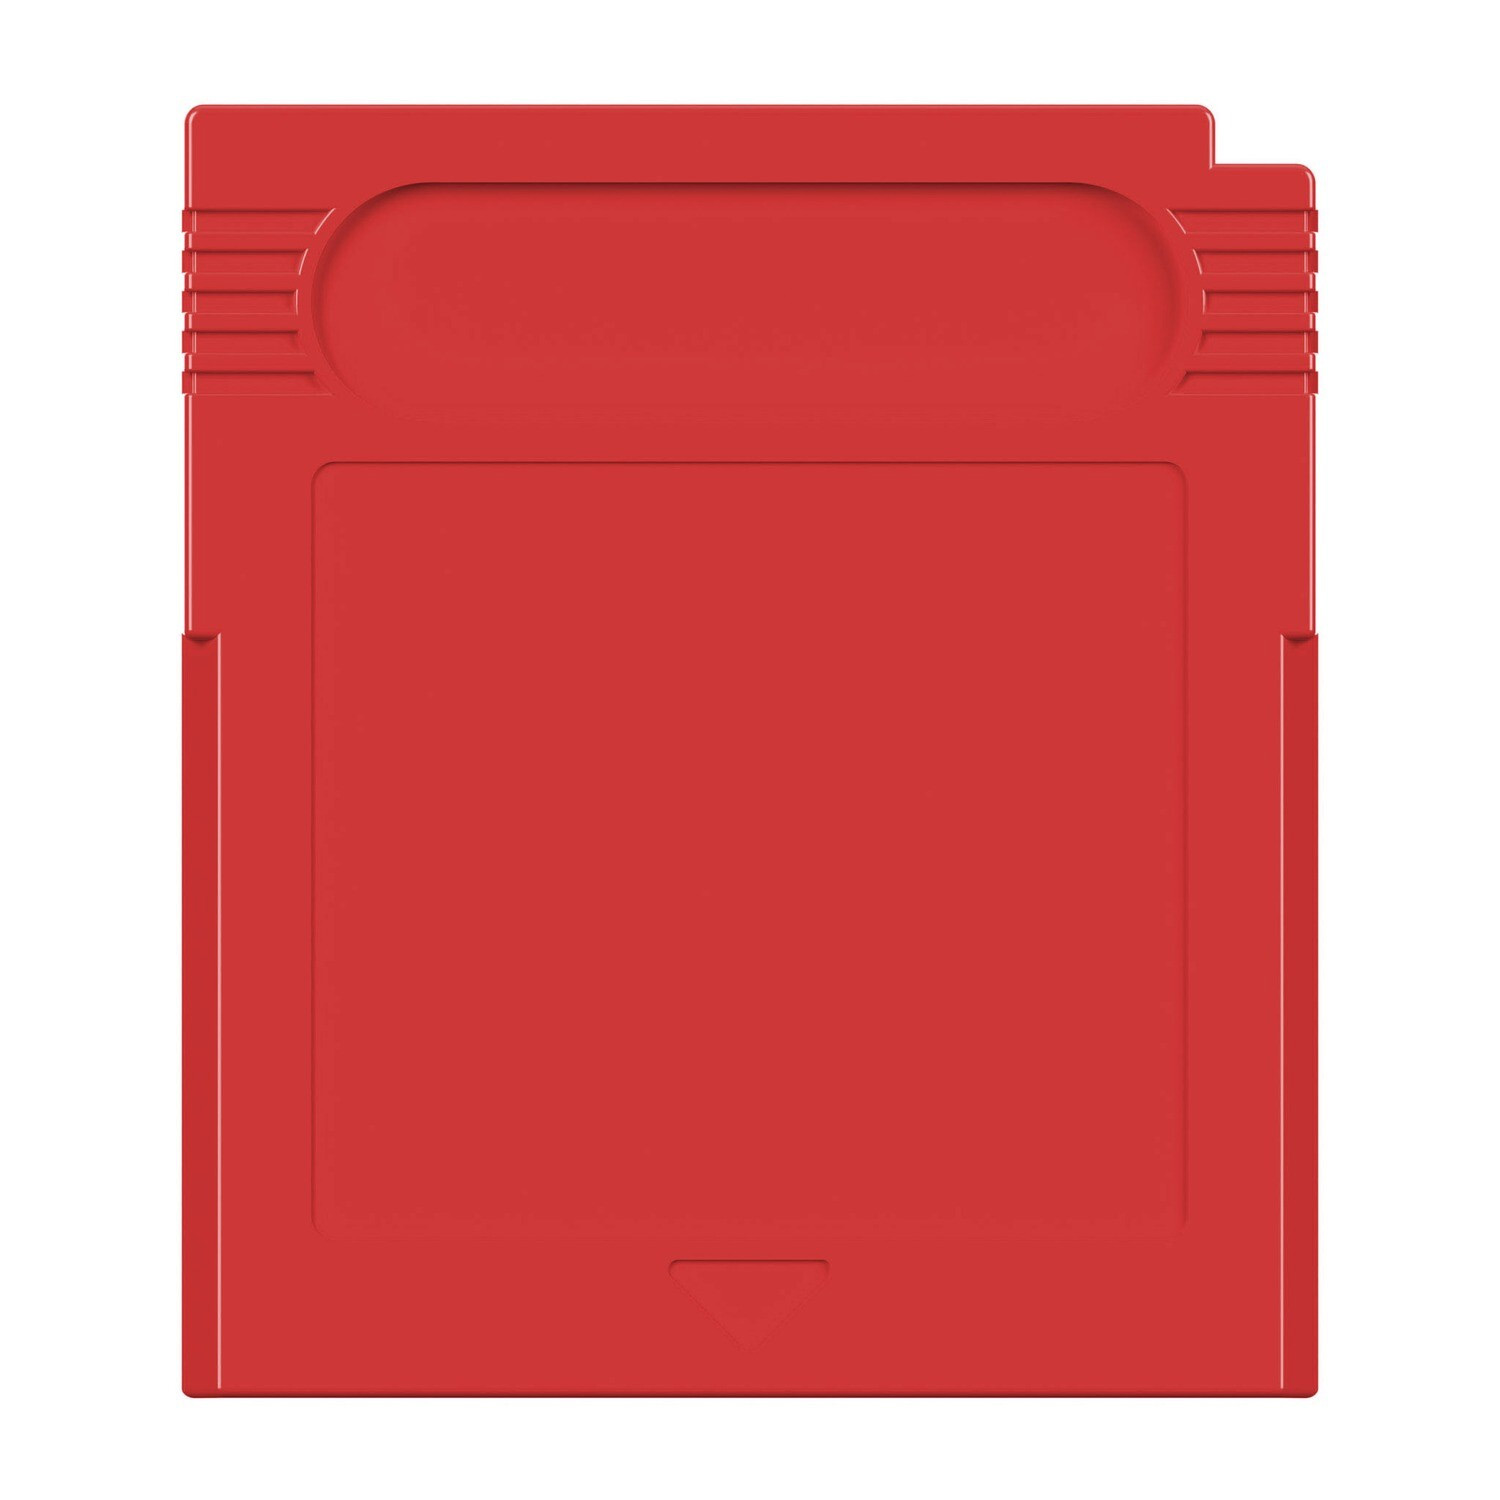 Game Boy Module Shell (Red)